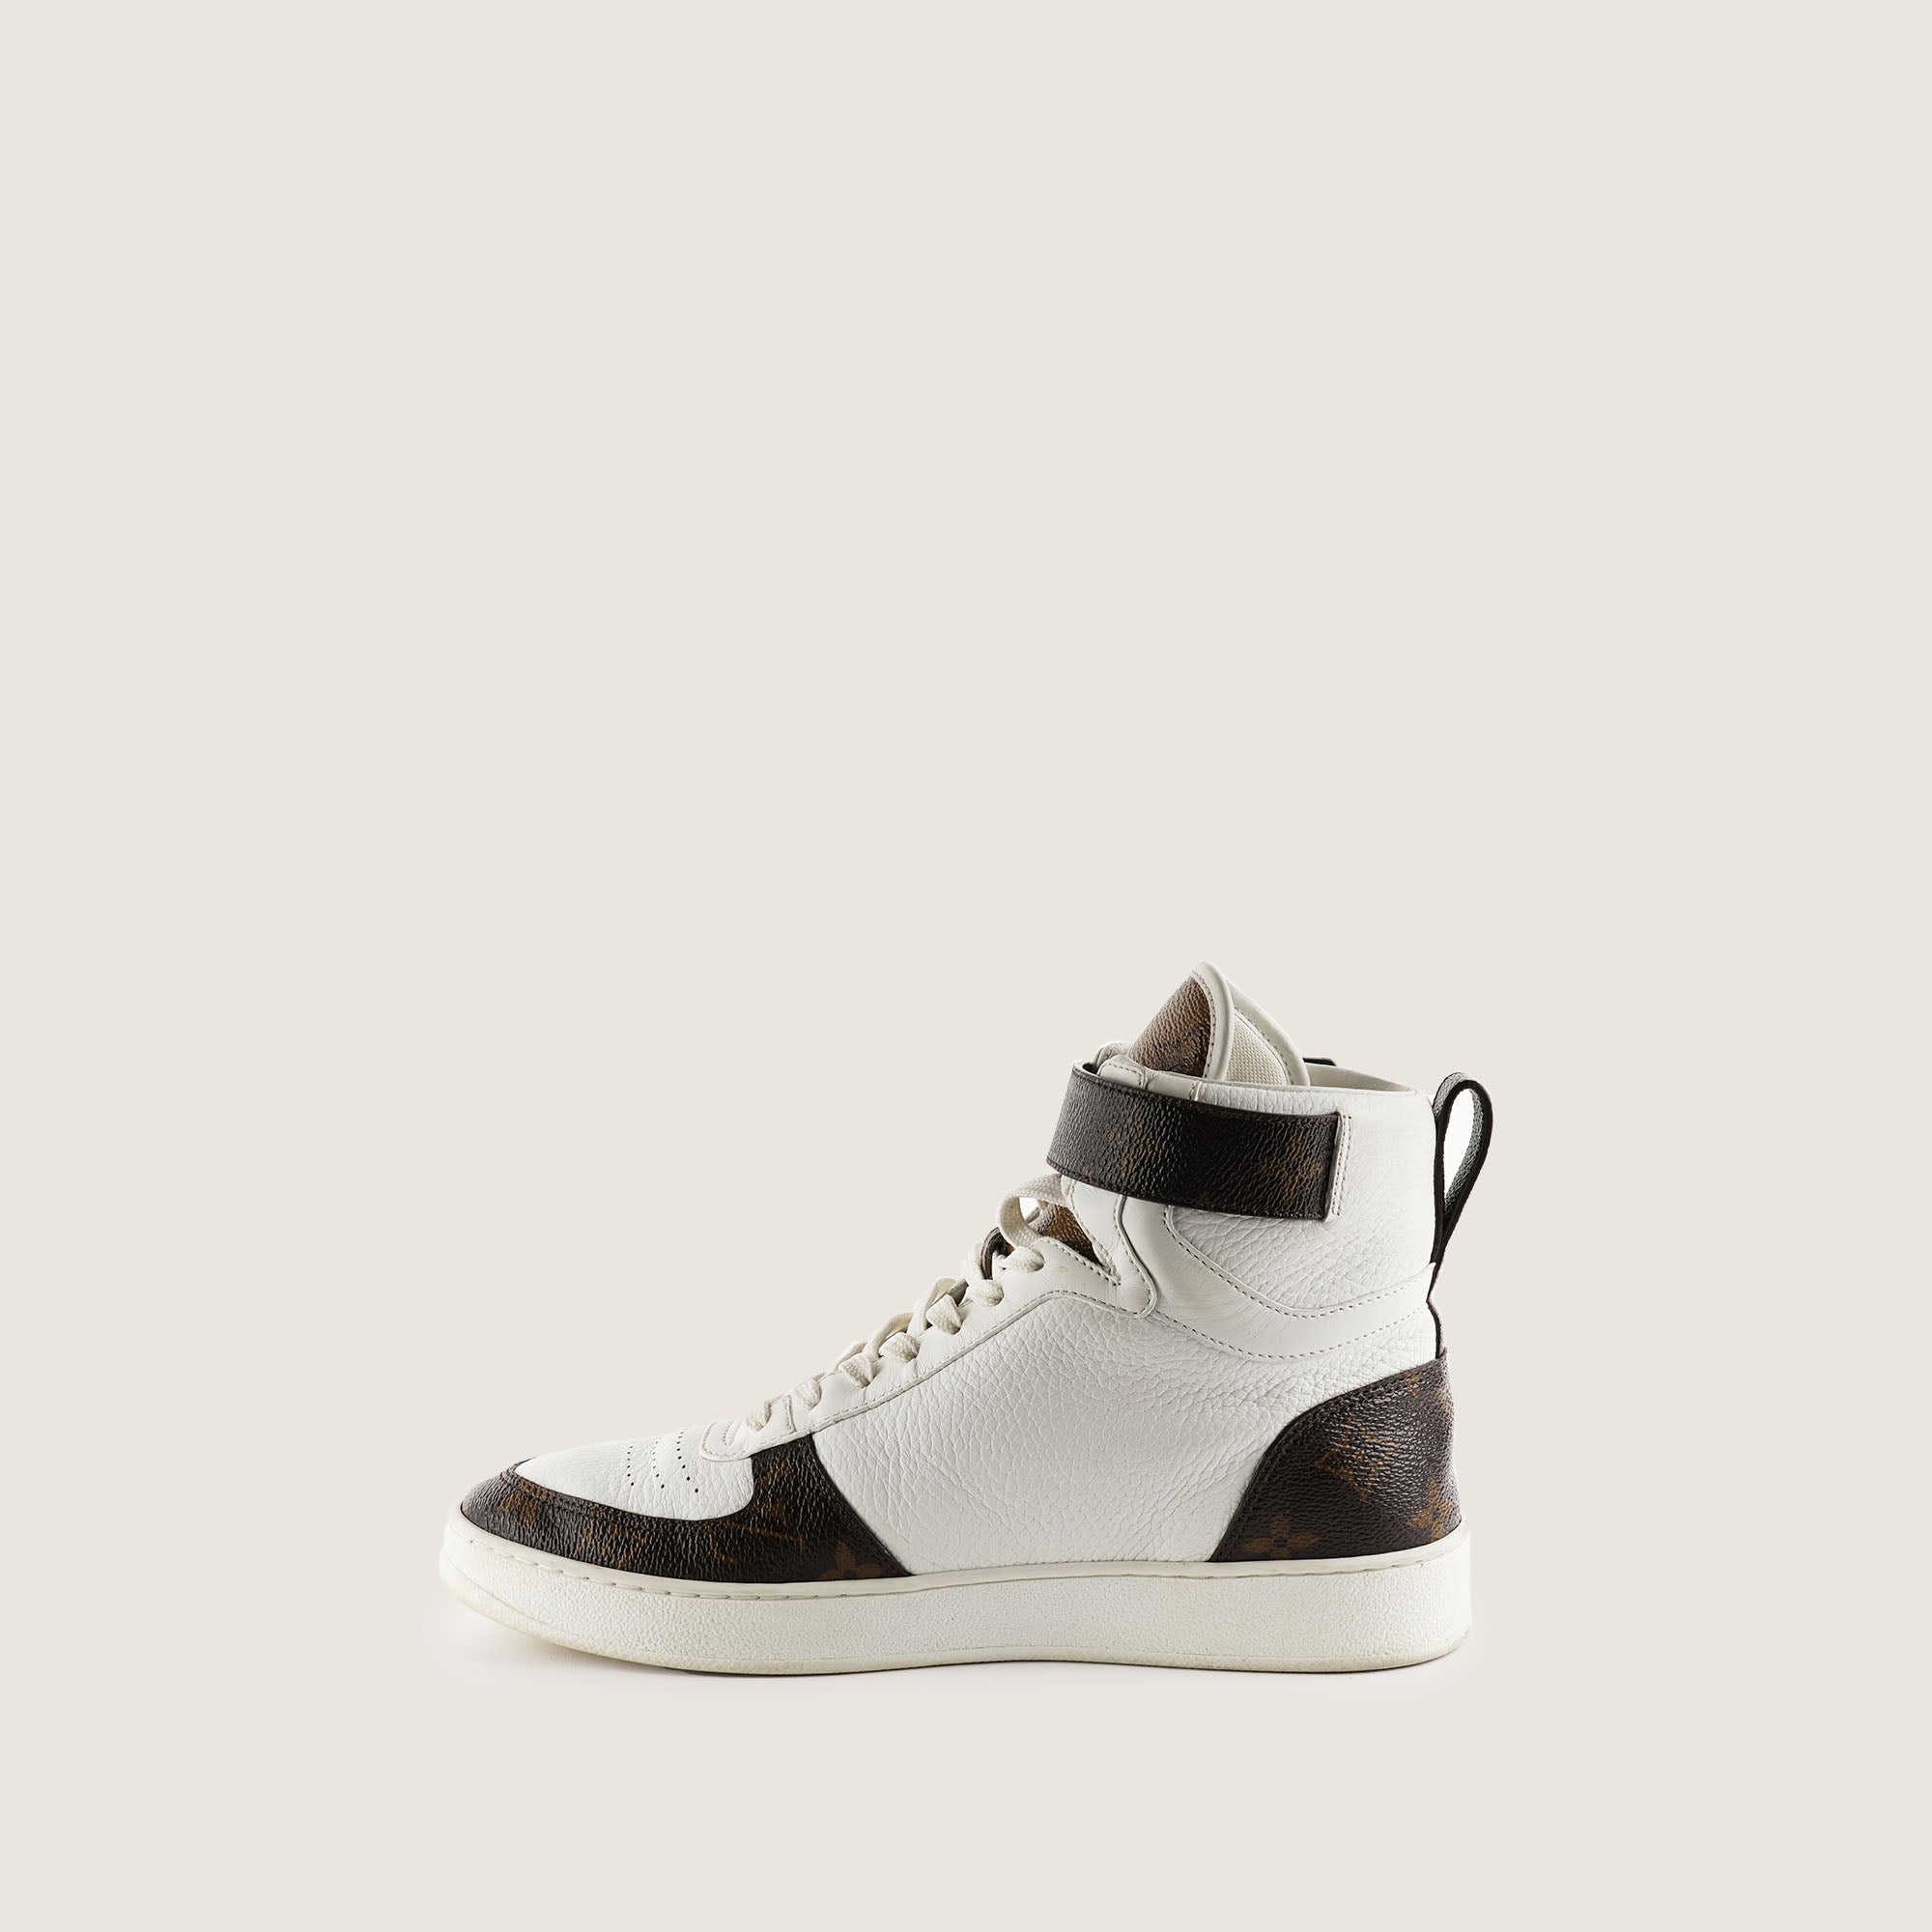 Boombox Sneaker Boot 38 - LOUIS VUITTON - Affordable Luxury image